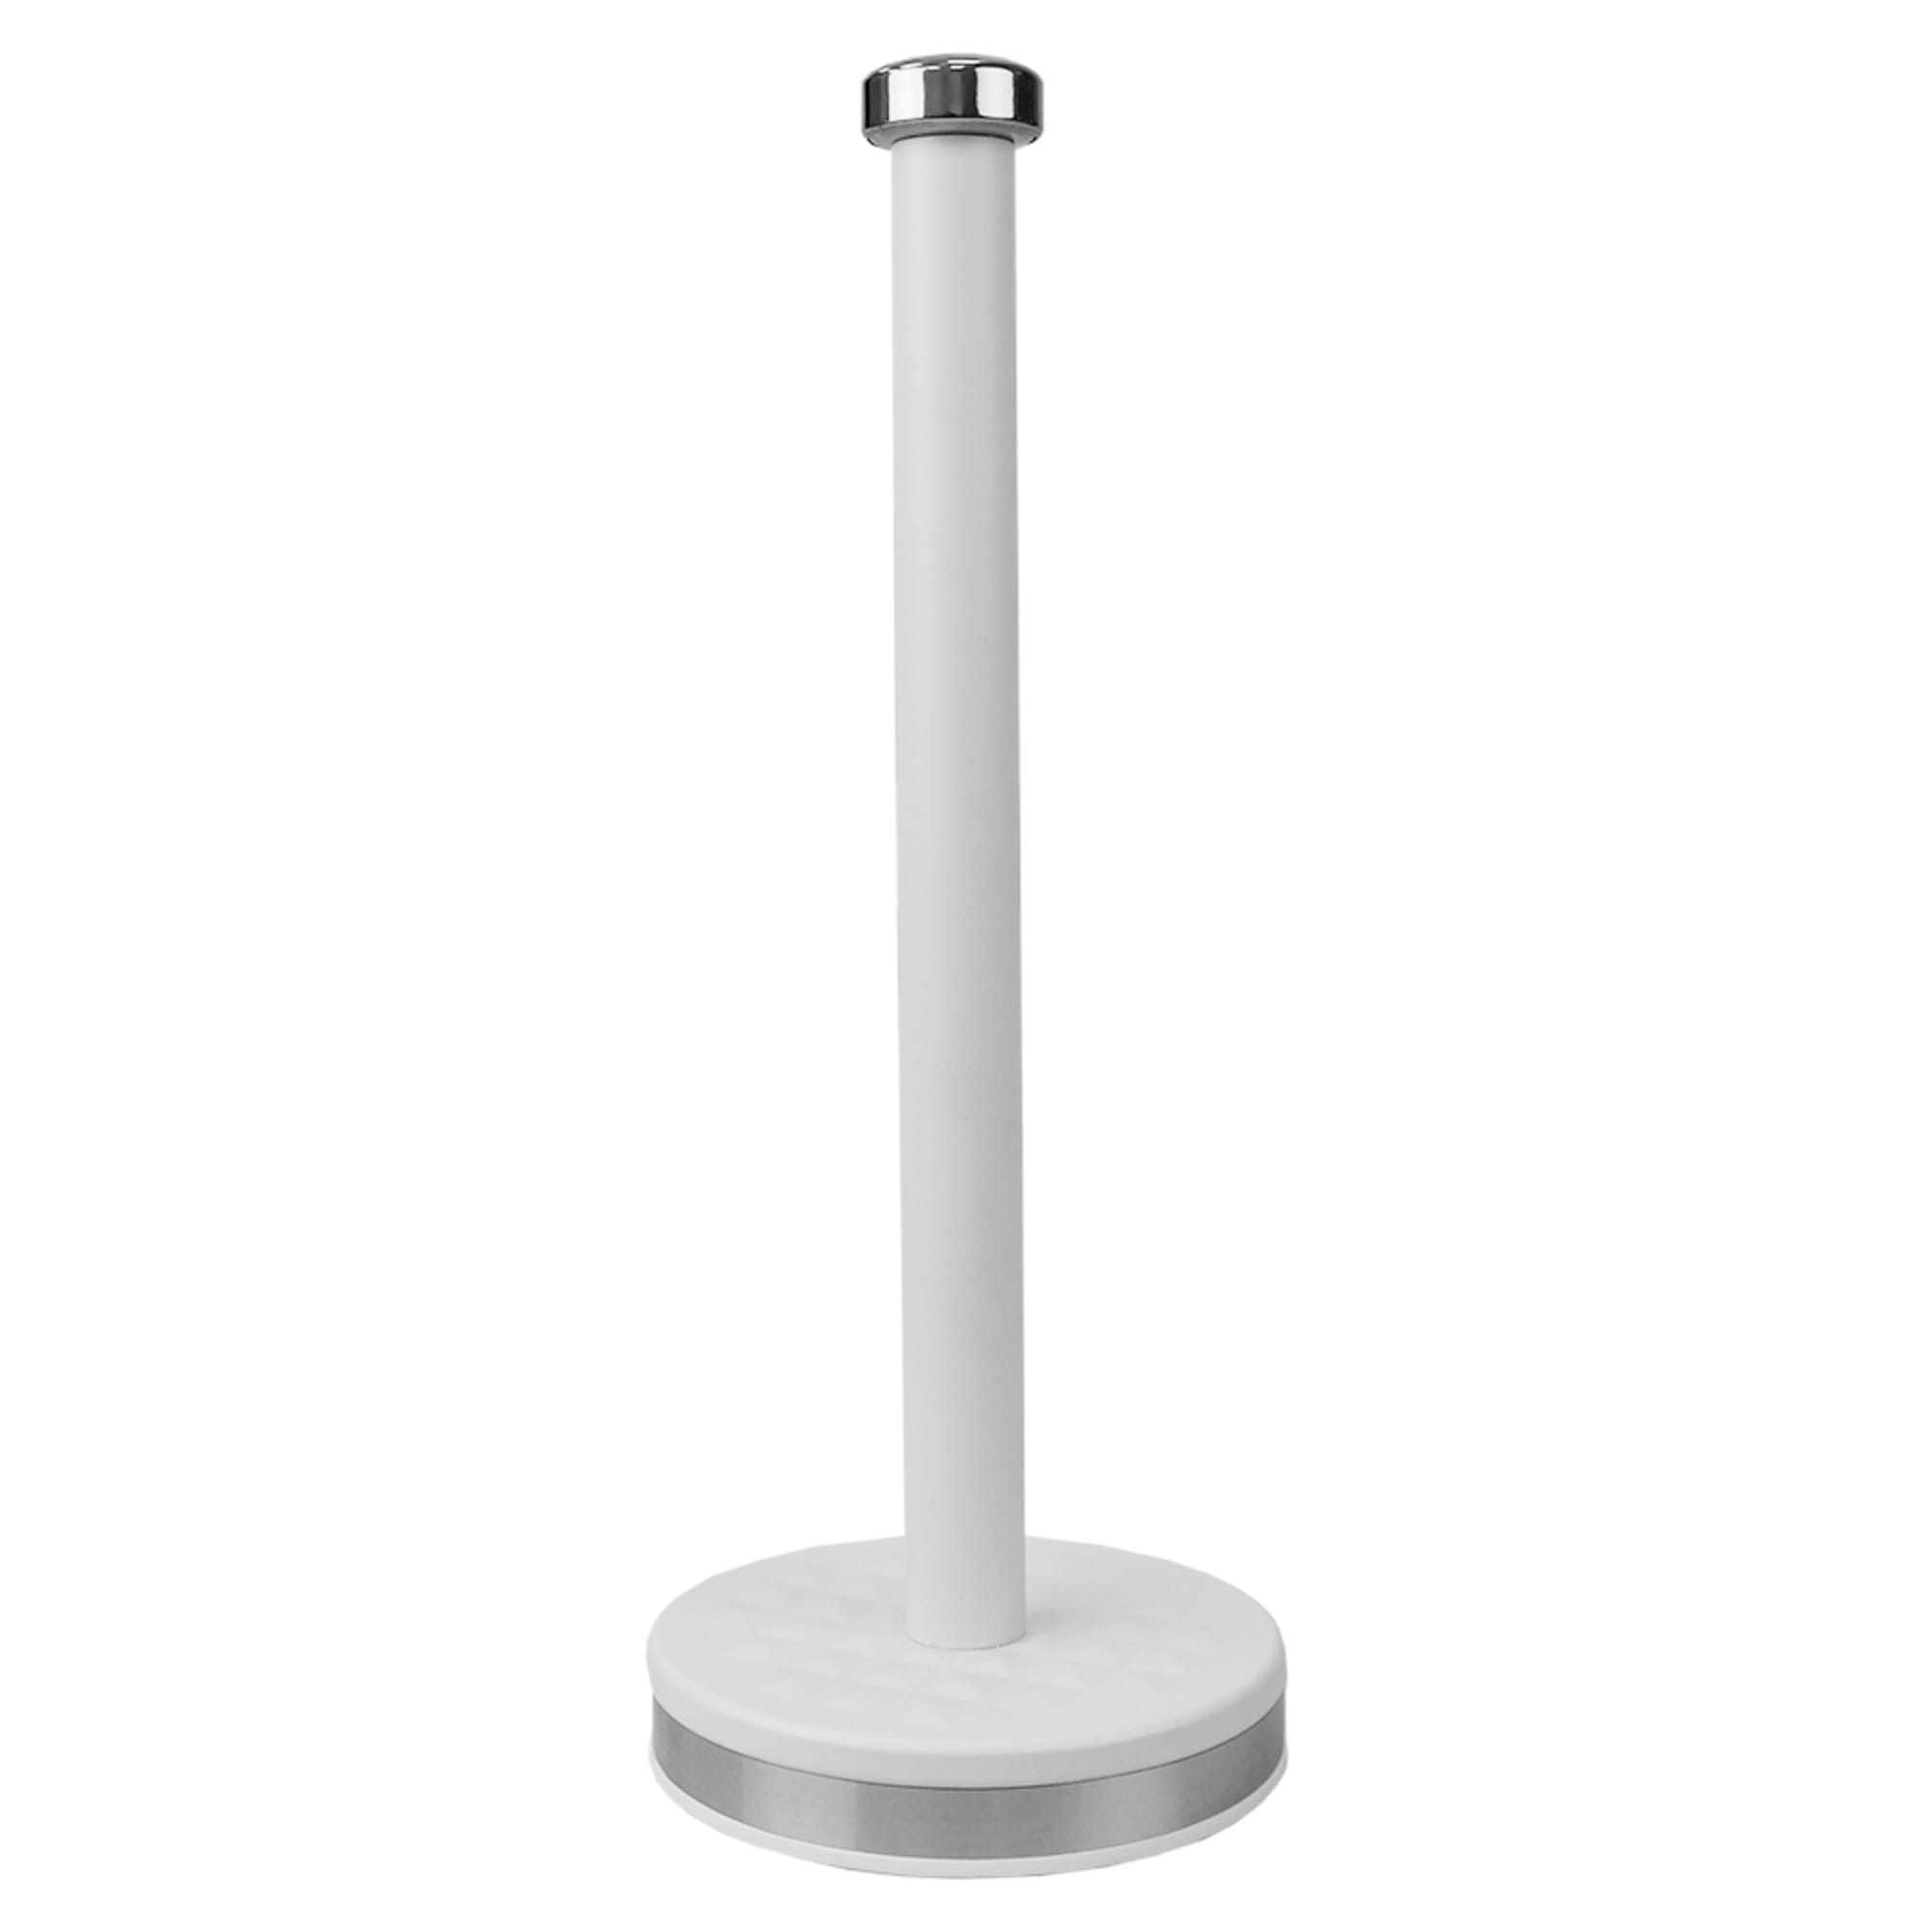 Michael Graves Design Soho Freestanding Tin Paper Towel Holder with Easy Twist On Finial, White $12.00 EACH, CASE PACK OF 12